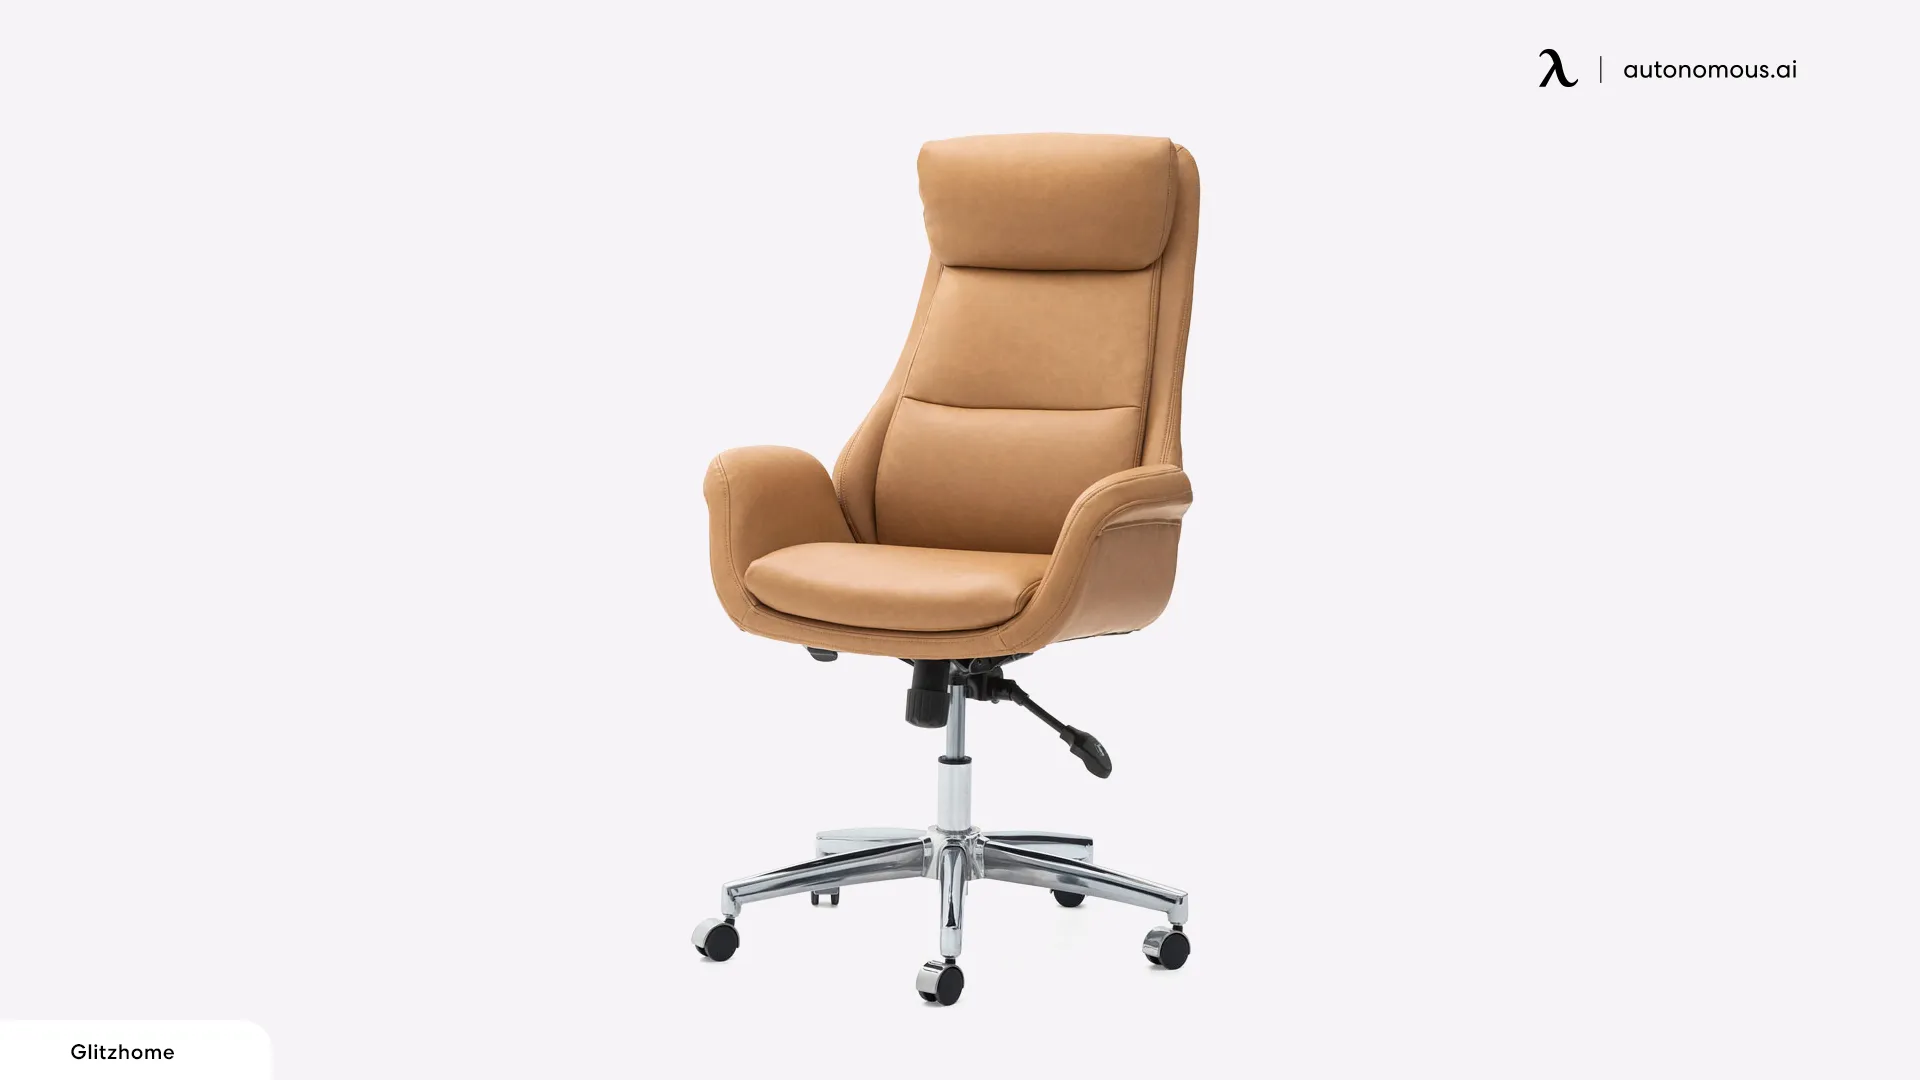 Glitzhome Adjustable High-Back Office Chair